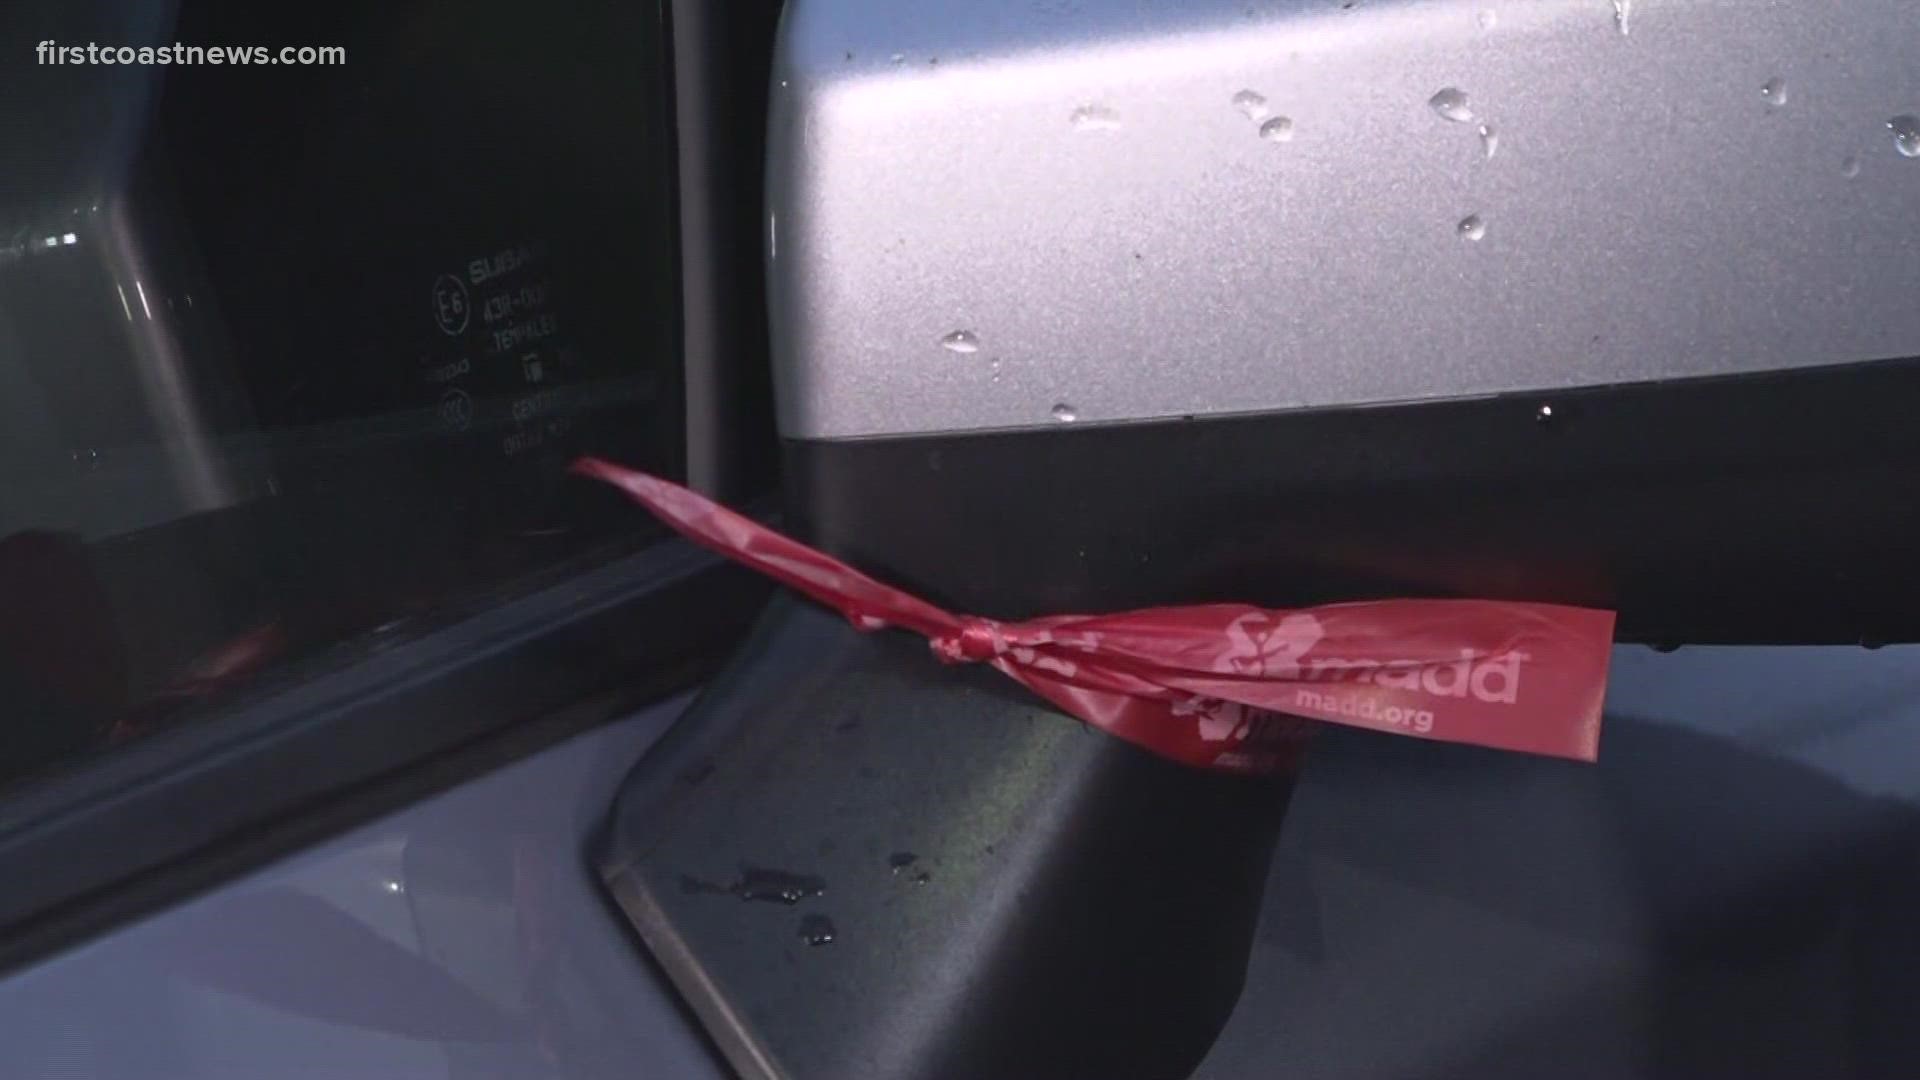 It's a reminder that could save a life: Tie a red ribbon or put a red magnet on your vehicle to remind drivers not to drink before they get behind the wheel.